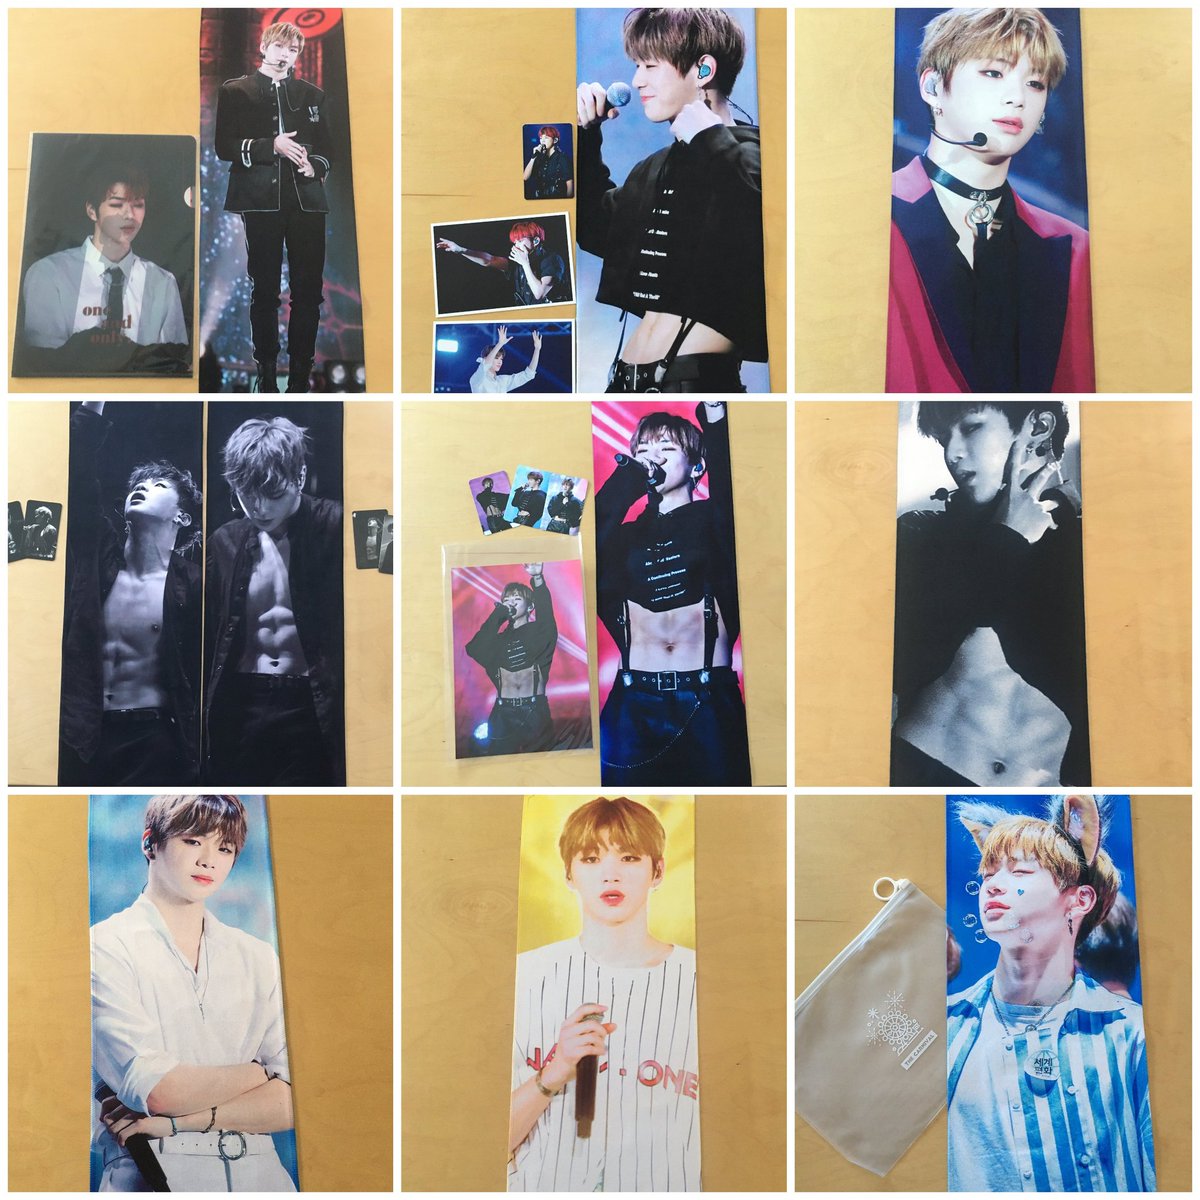 Anneyeong Porkies!KANG DANIEL CHEERING SLOGANPHP 950 each (w/zipper bags)1 DAY PAYMENT OF 50% OR FULL. OTHER 50% TIL DOP.DOP AUG 19SHIP TO PH AUG 22ETA 15 DAYS OR DEPENDS ON THE SITN.MOP BPI & GCASH ONLY!DM TO ORDER.Kamsa!  #porKShopGO19  #wannaone